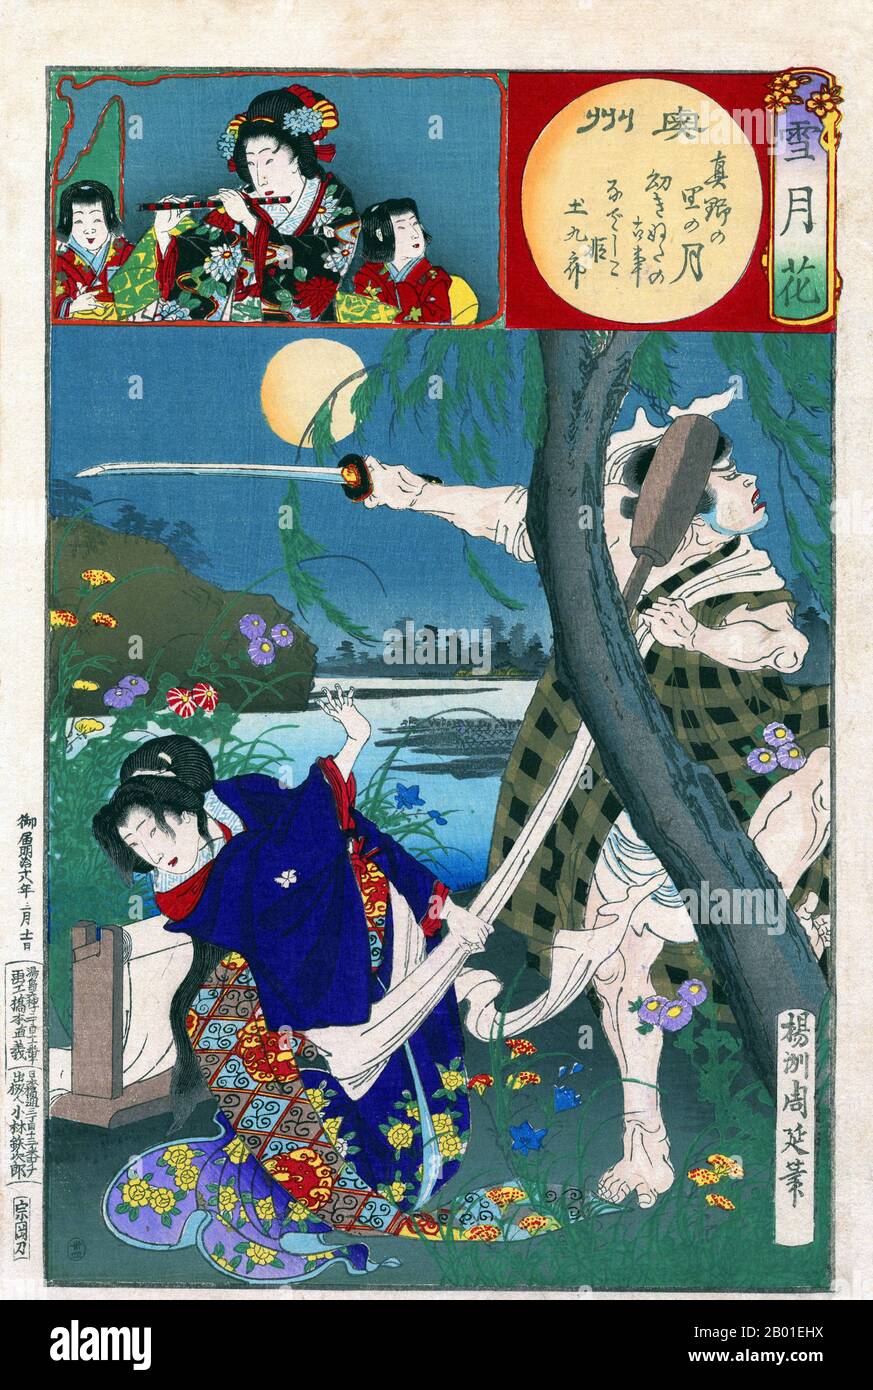 Japan: Princess Nadeshiko is attacked by the bandit Tsuchikiro. Ukiyo-e woodblock print by Yoshu Chikanobu (1838-1912), 1885.  Under a summer moon in Oshu (Mutsu Province), Princess Nadeshiko, who had been fulling (finishing) silk, is attacked by the robber Tsuchikuro. She parries his sword thrust by throwing a fulling mallet into his face.  Toyohara Chikanobu, better known to his contemporaries as Yōshū Chikanobu, was a prolific woodblock artist of Japan's Meiji period. His works capture the transition from the age of the samurai to Meiji modernity. Stock Photo